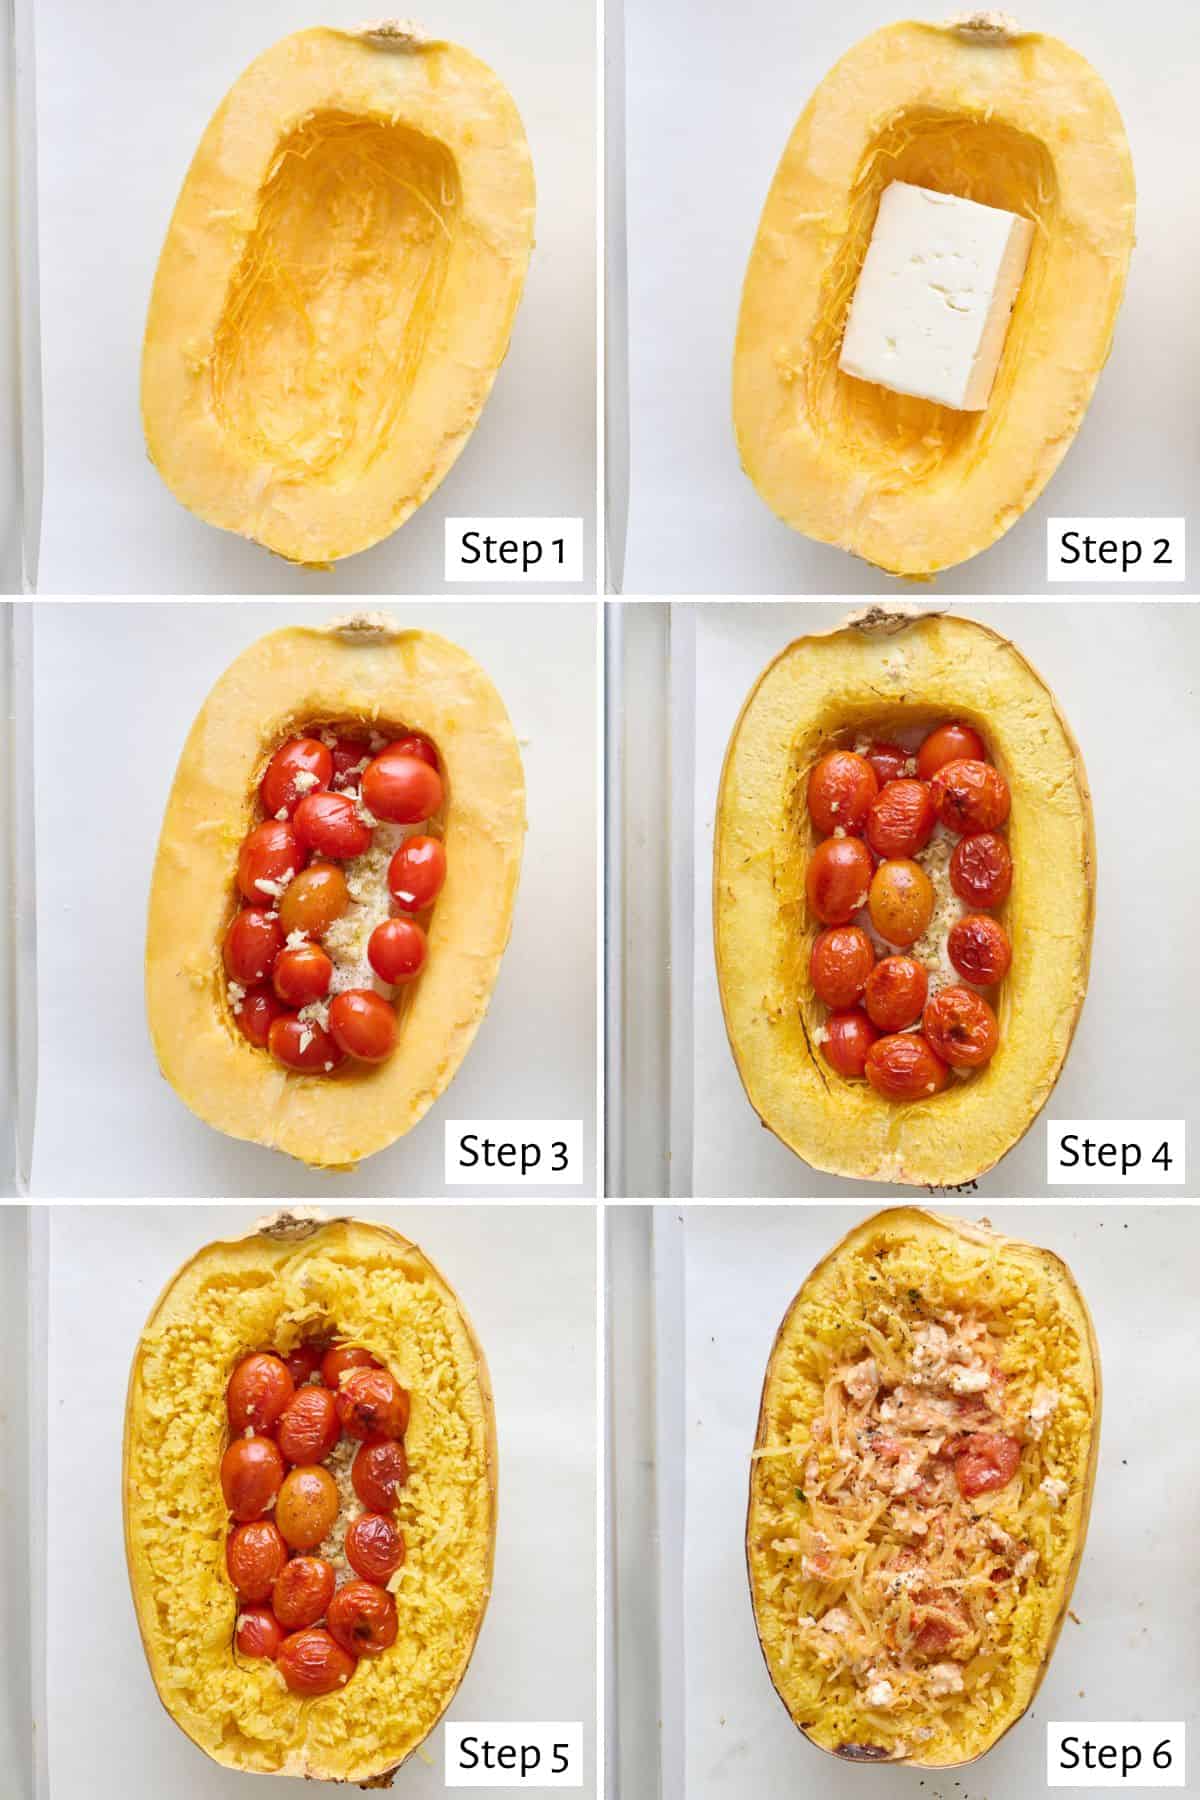 6-image collage of baking spaghetti squash: 1 - Prepared spaghetti squash halves cut side up on a sheet pan; 2 - Feta added to each half; 3 - Cherry tomatoes, garlic, spices, and oil added before baking; 4 - Squash after baking; 5 - Squash after pulling strings from side; 6 - After mixing squash, feta, and tomatoes together.